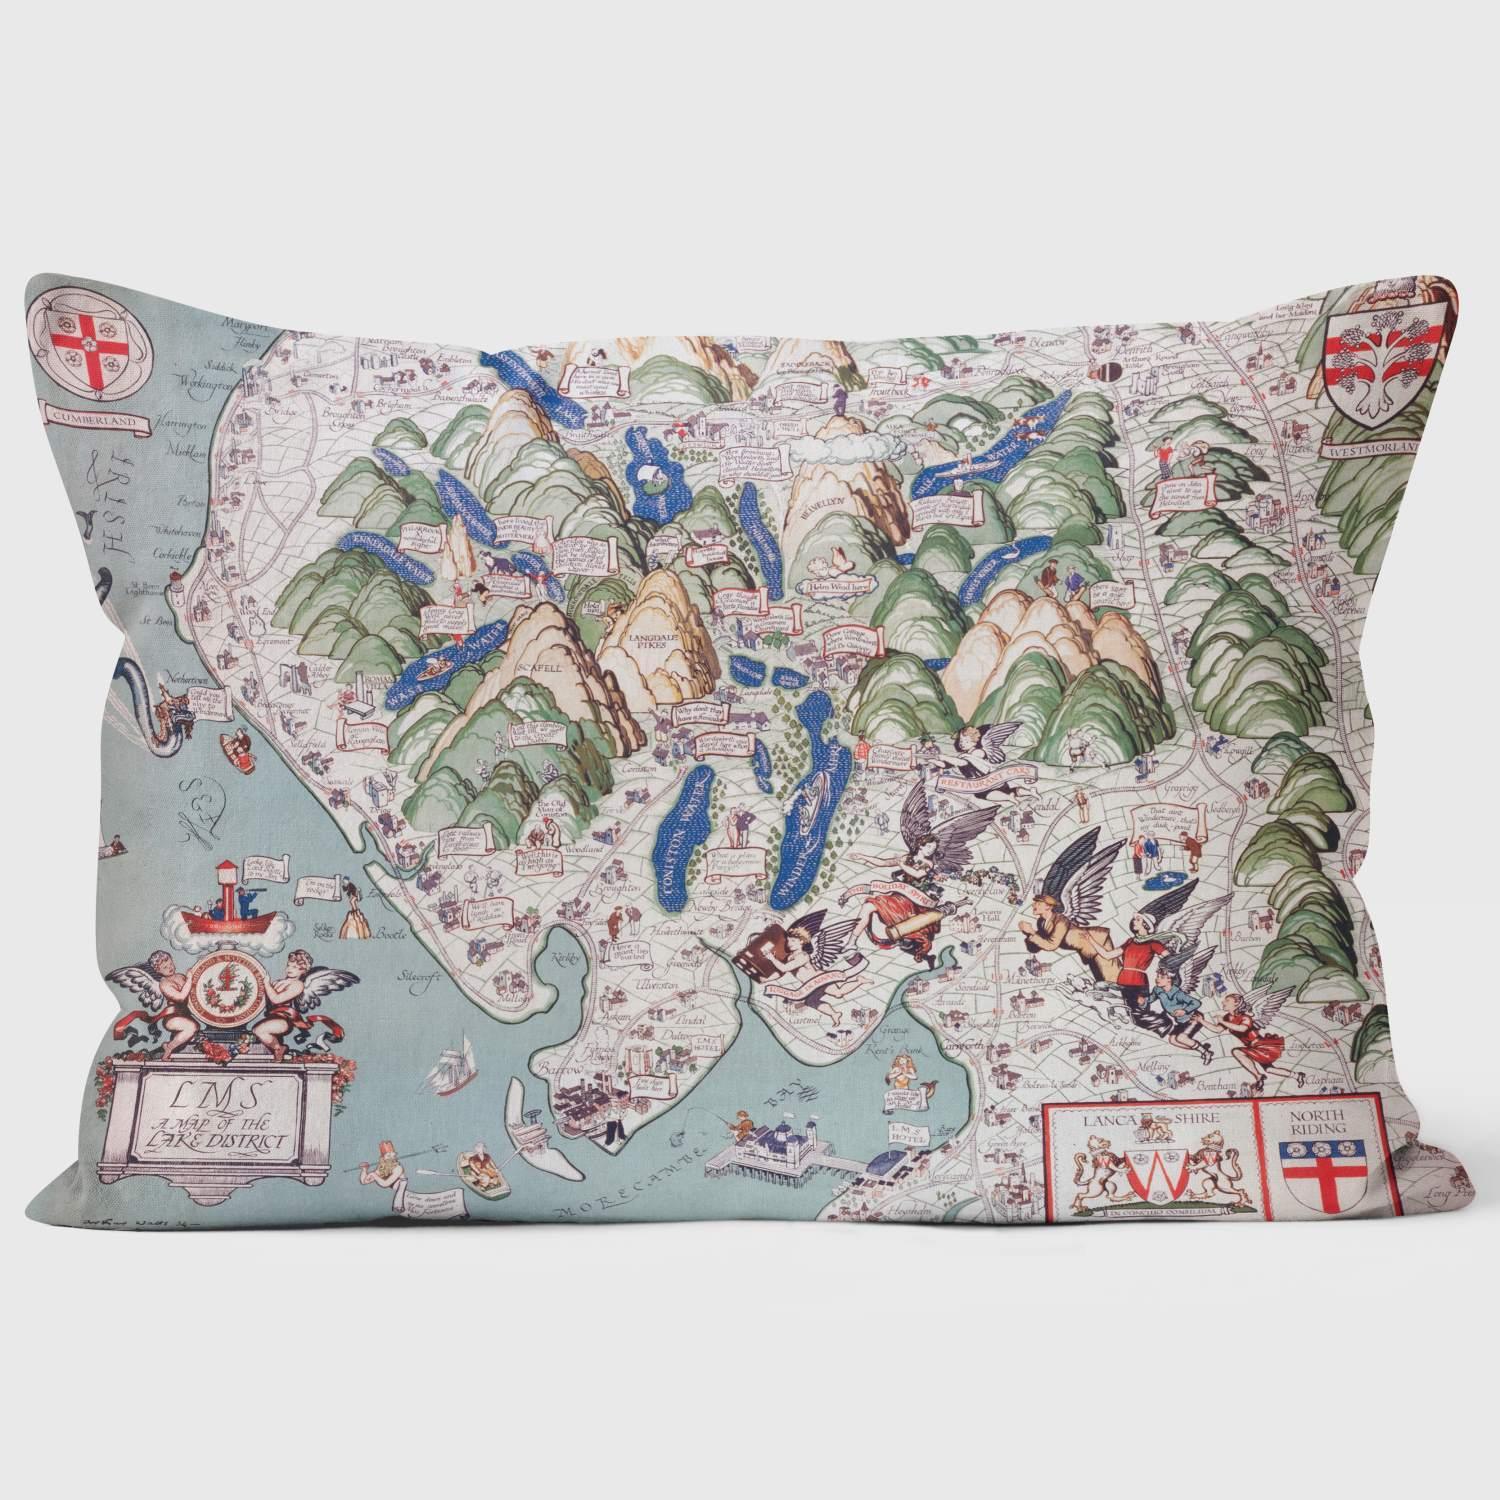 A Map Of The Lake District’ LMS 1923 -1947 - National Railway Museum Cushion - Handmade Cushions UK - WeLoveCushions